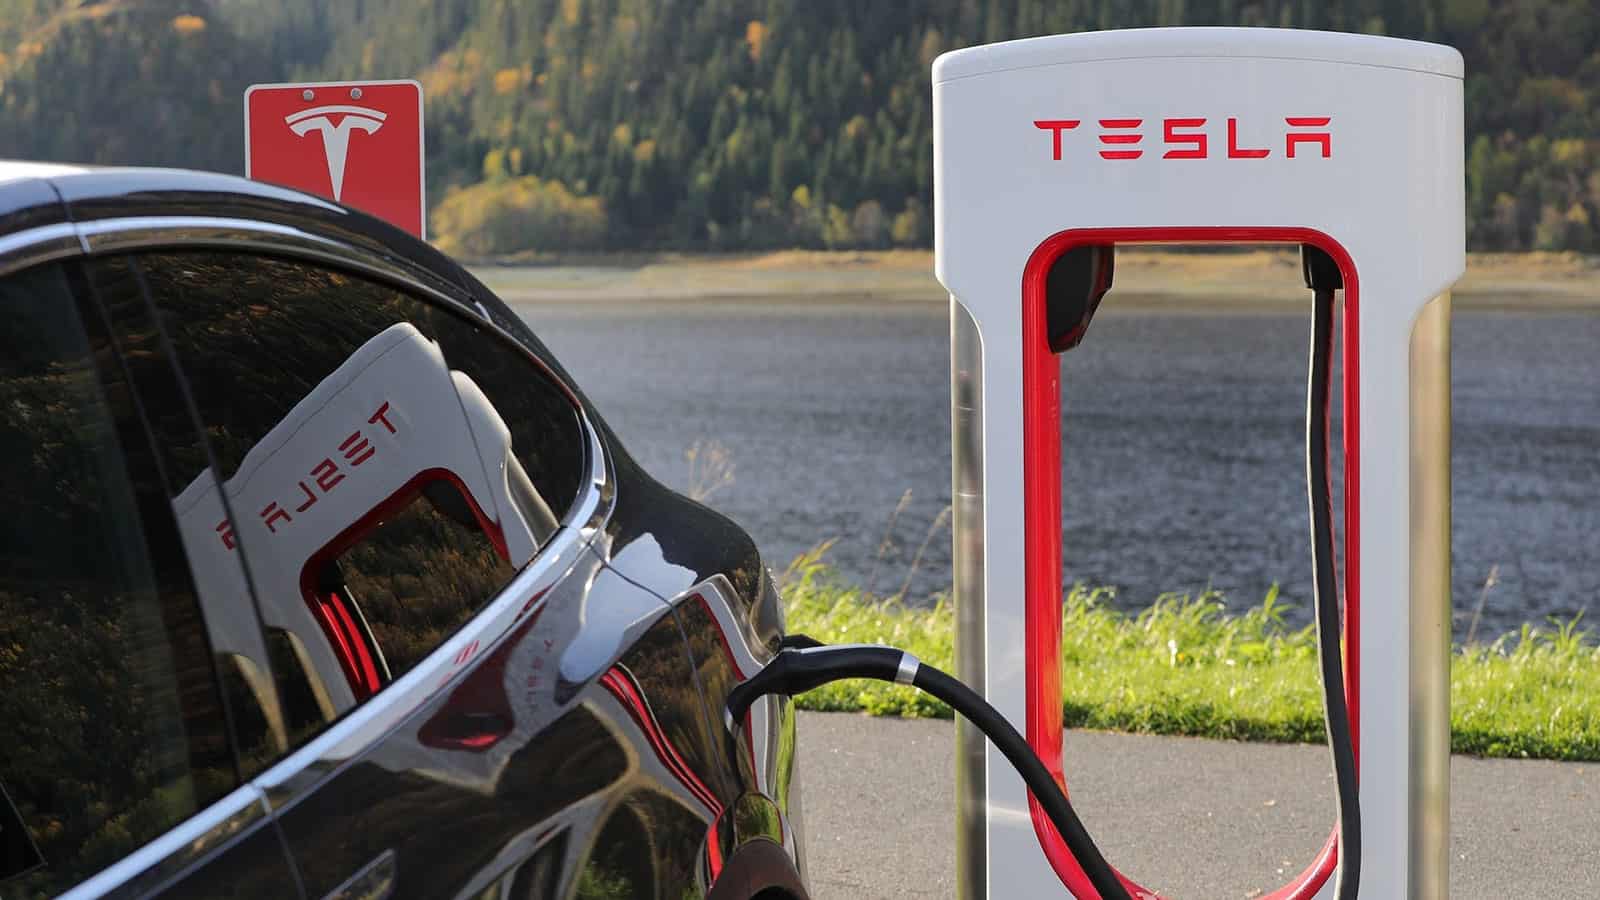 Tesla EV charging station with black car plugged in